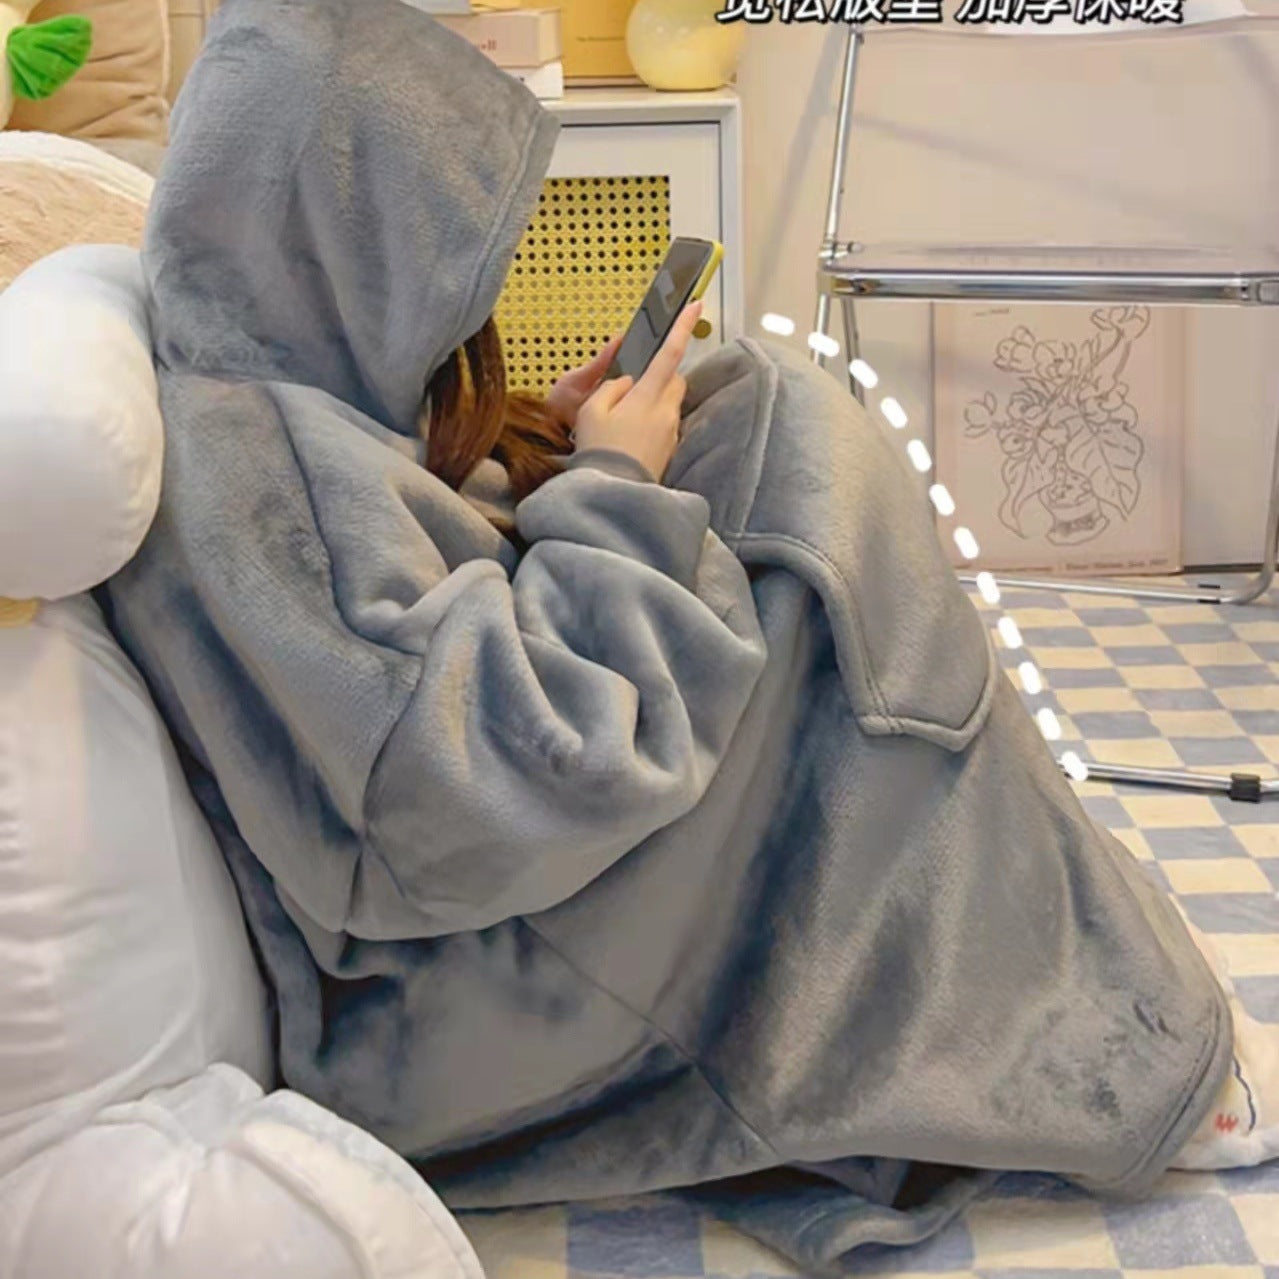 Hooded Blanket Nightgown: Cozy Warmth for Stylish Students!